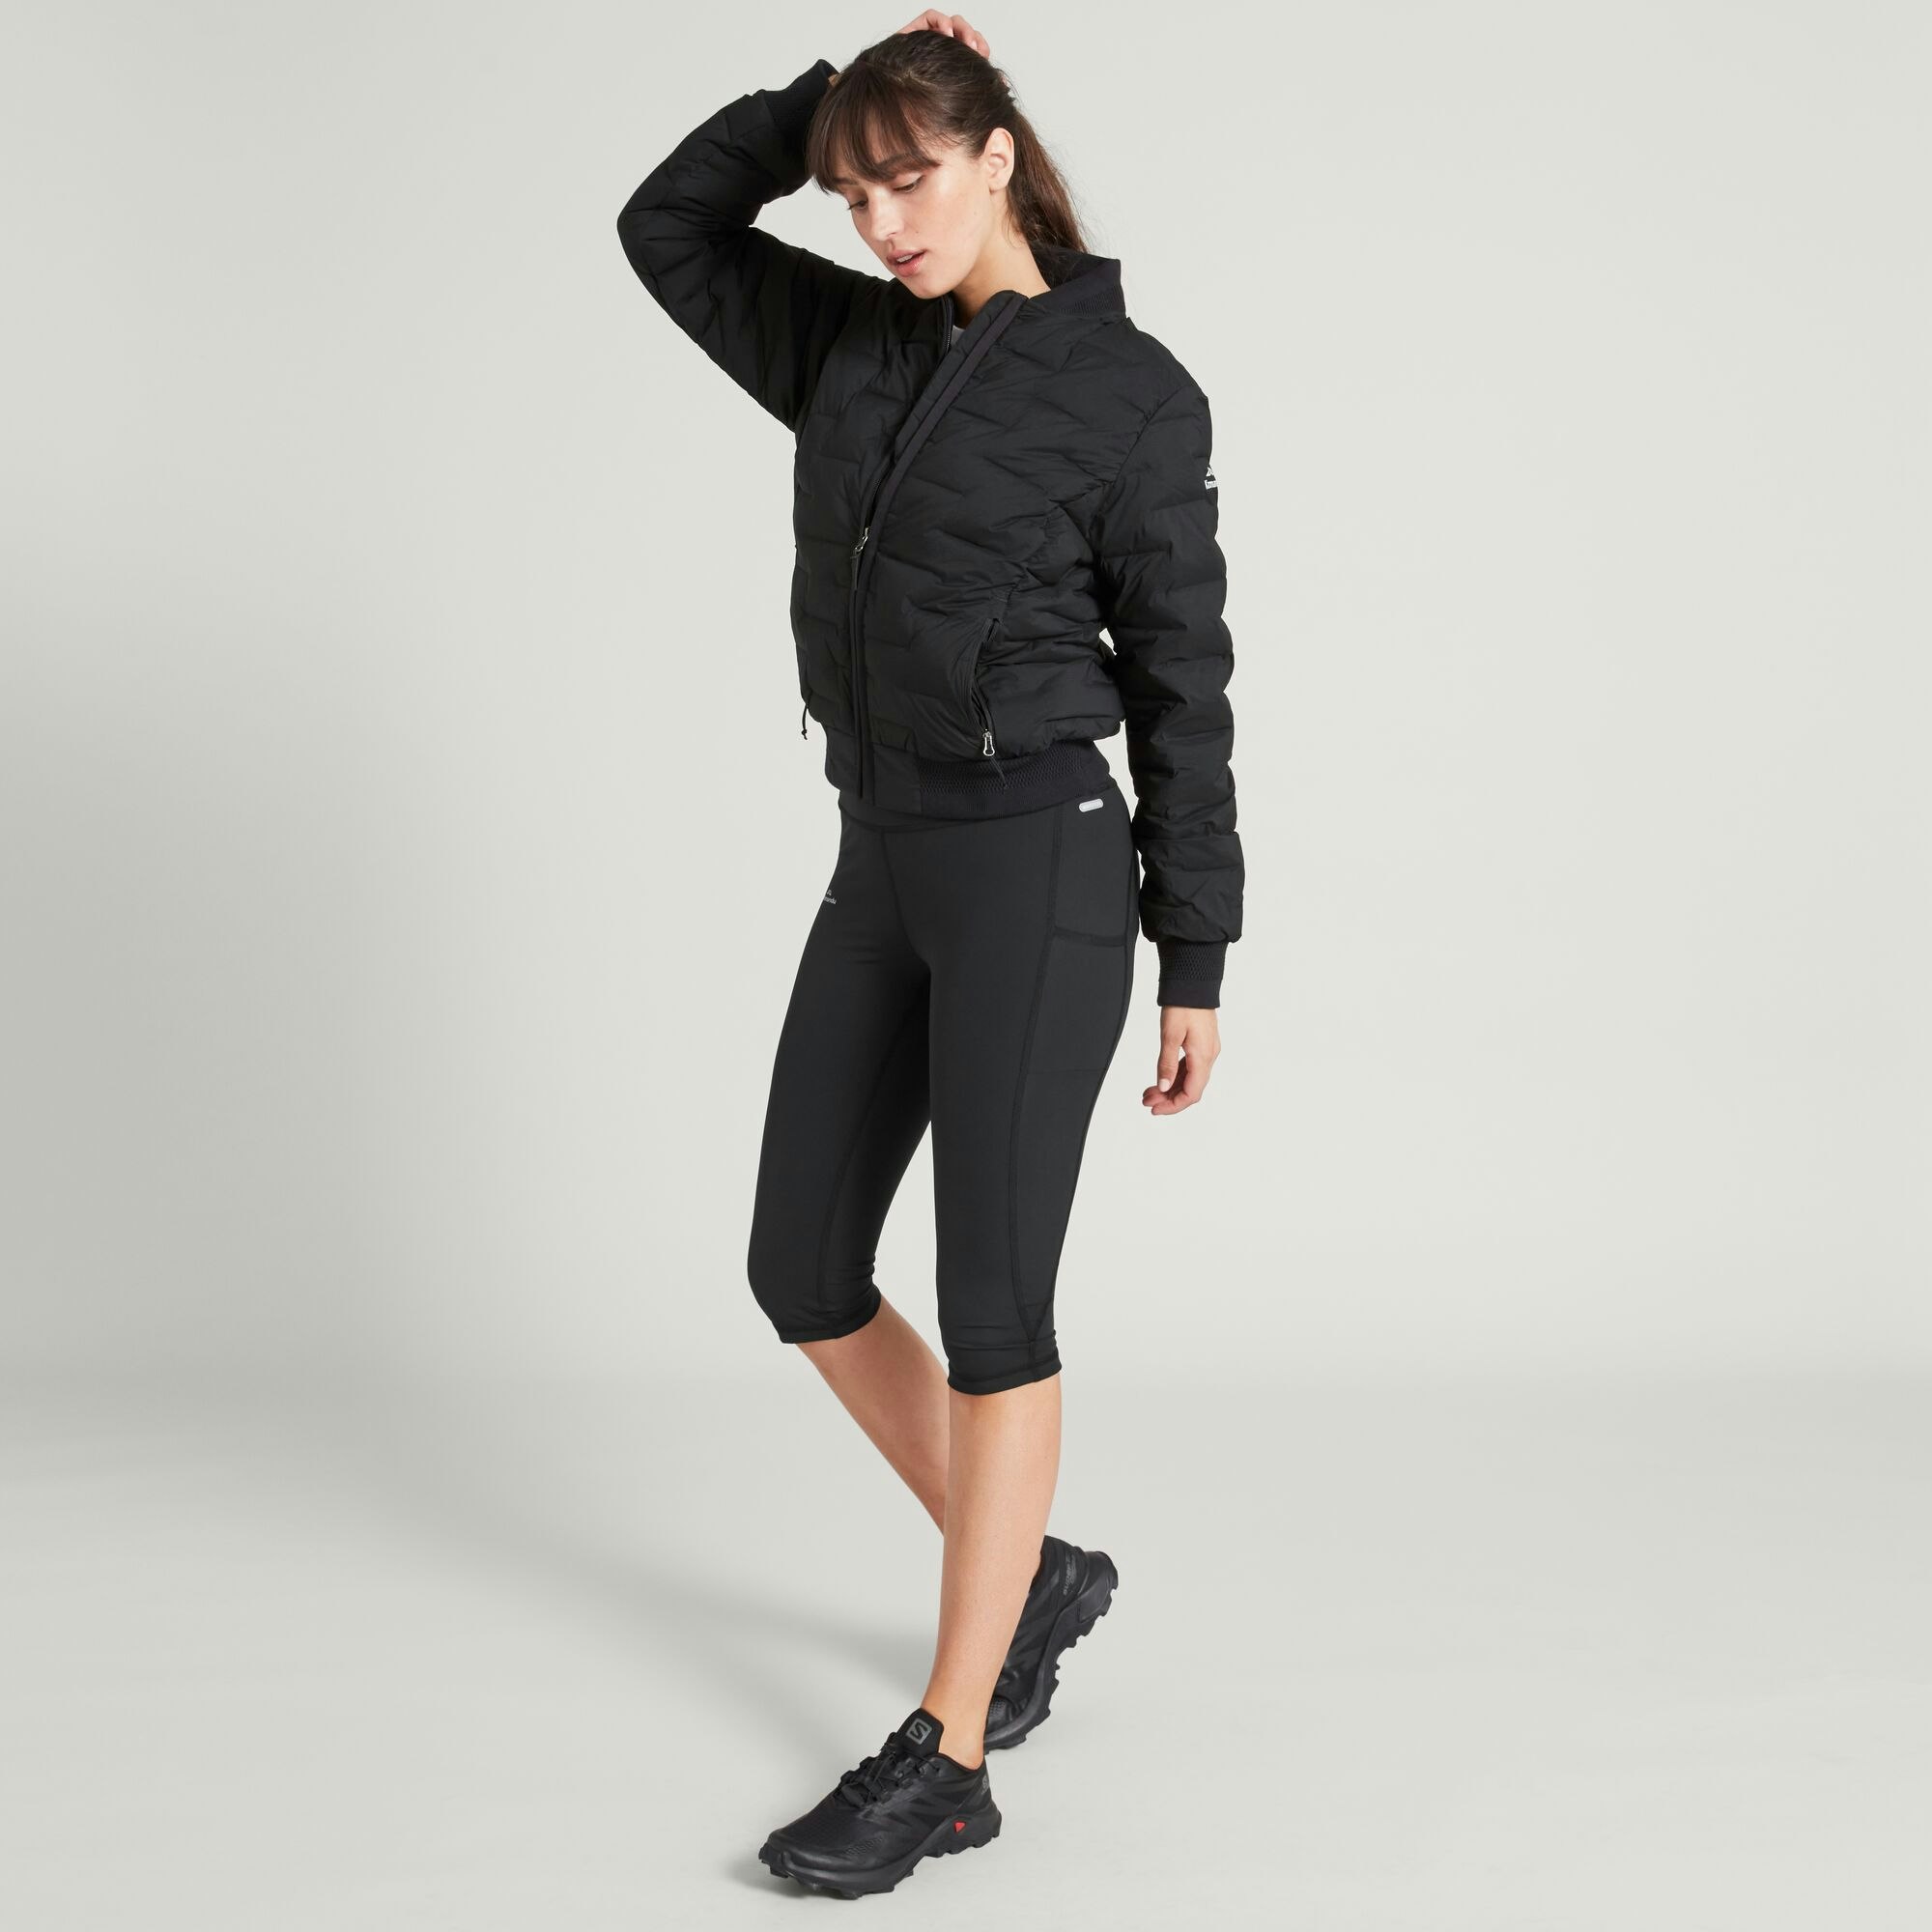 Womens Bomber Jackets | Sports Direct